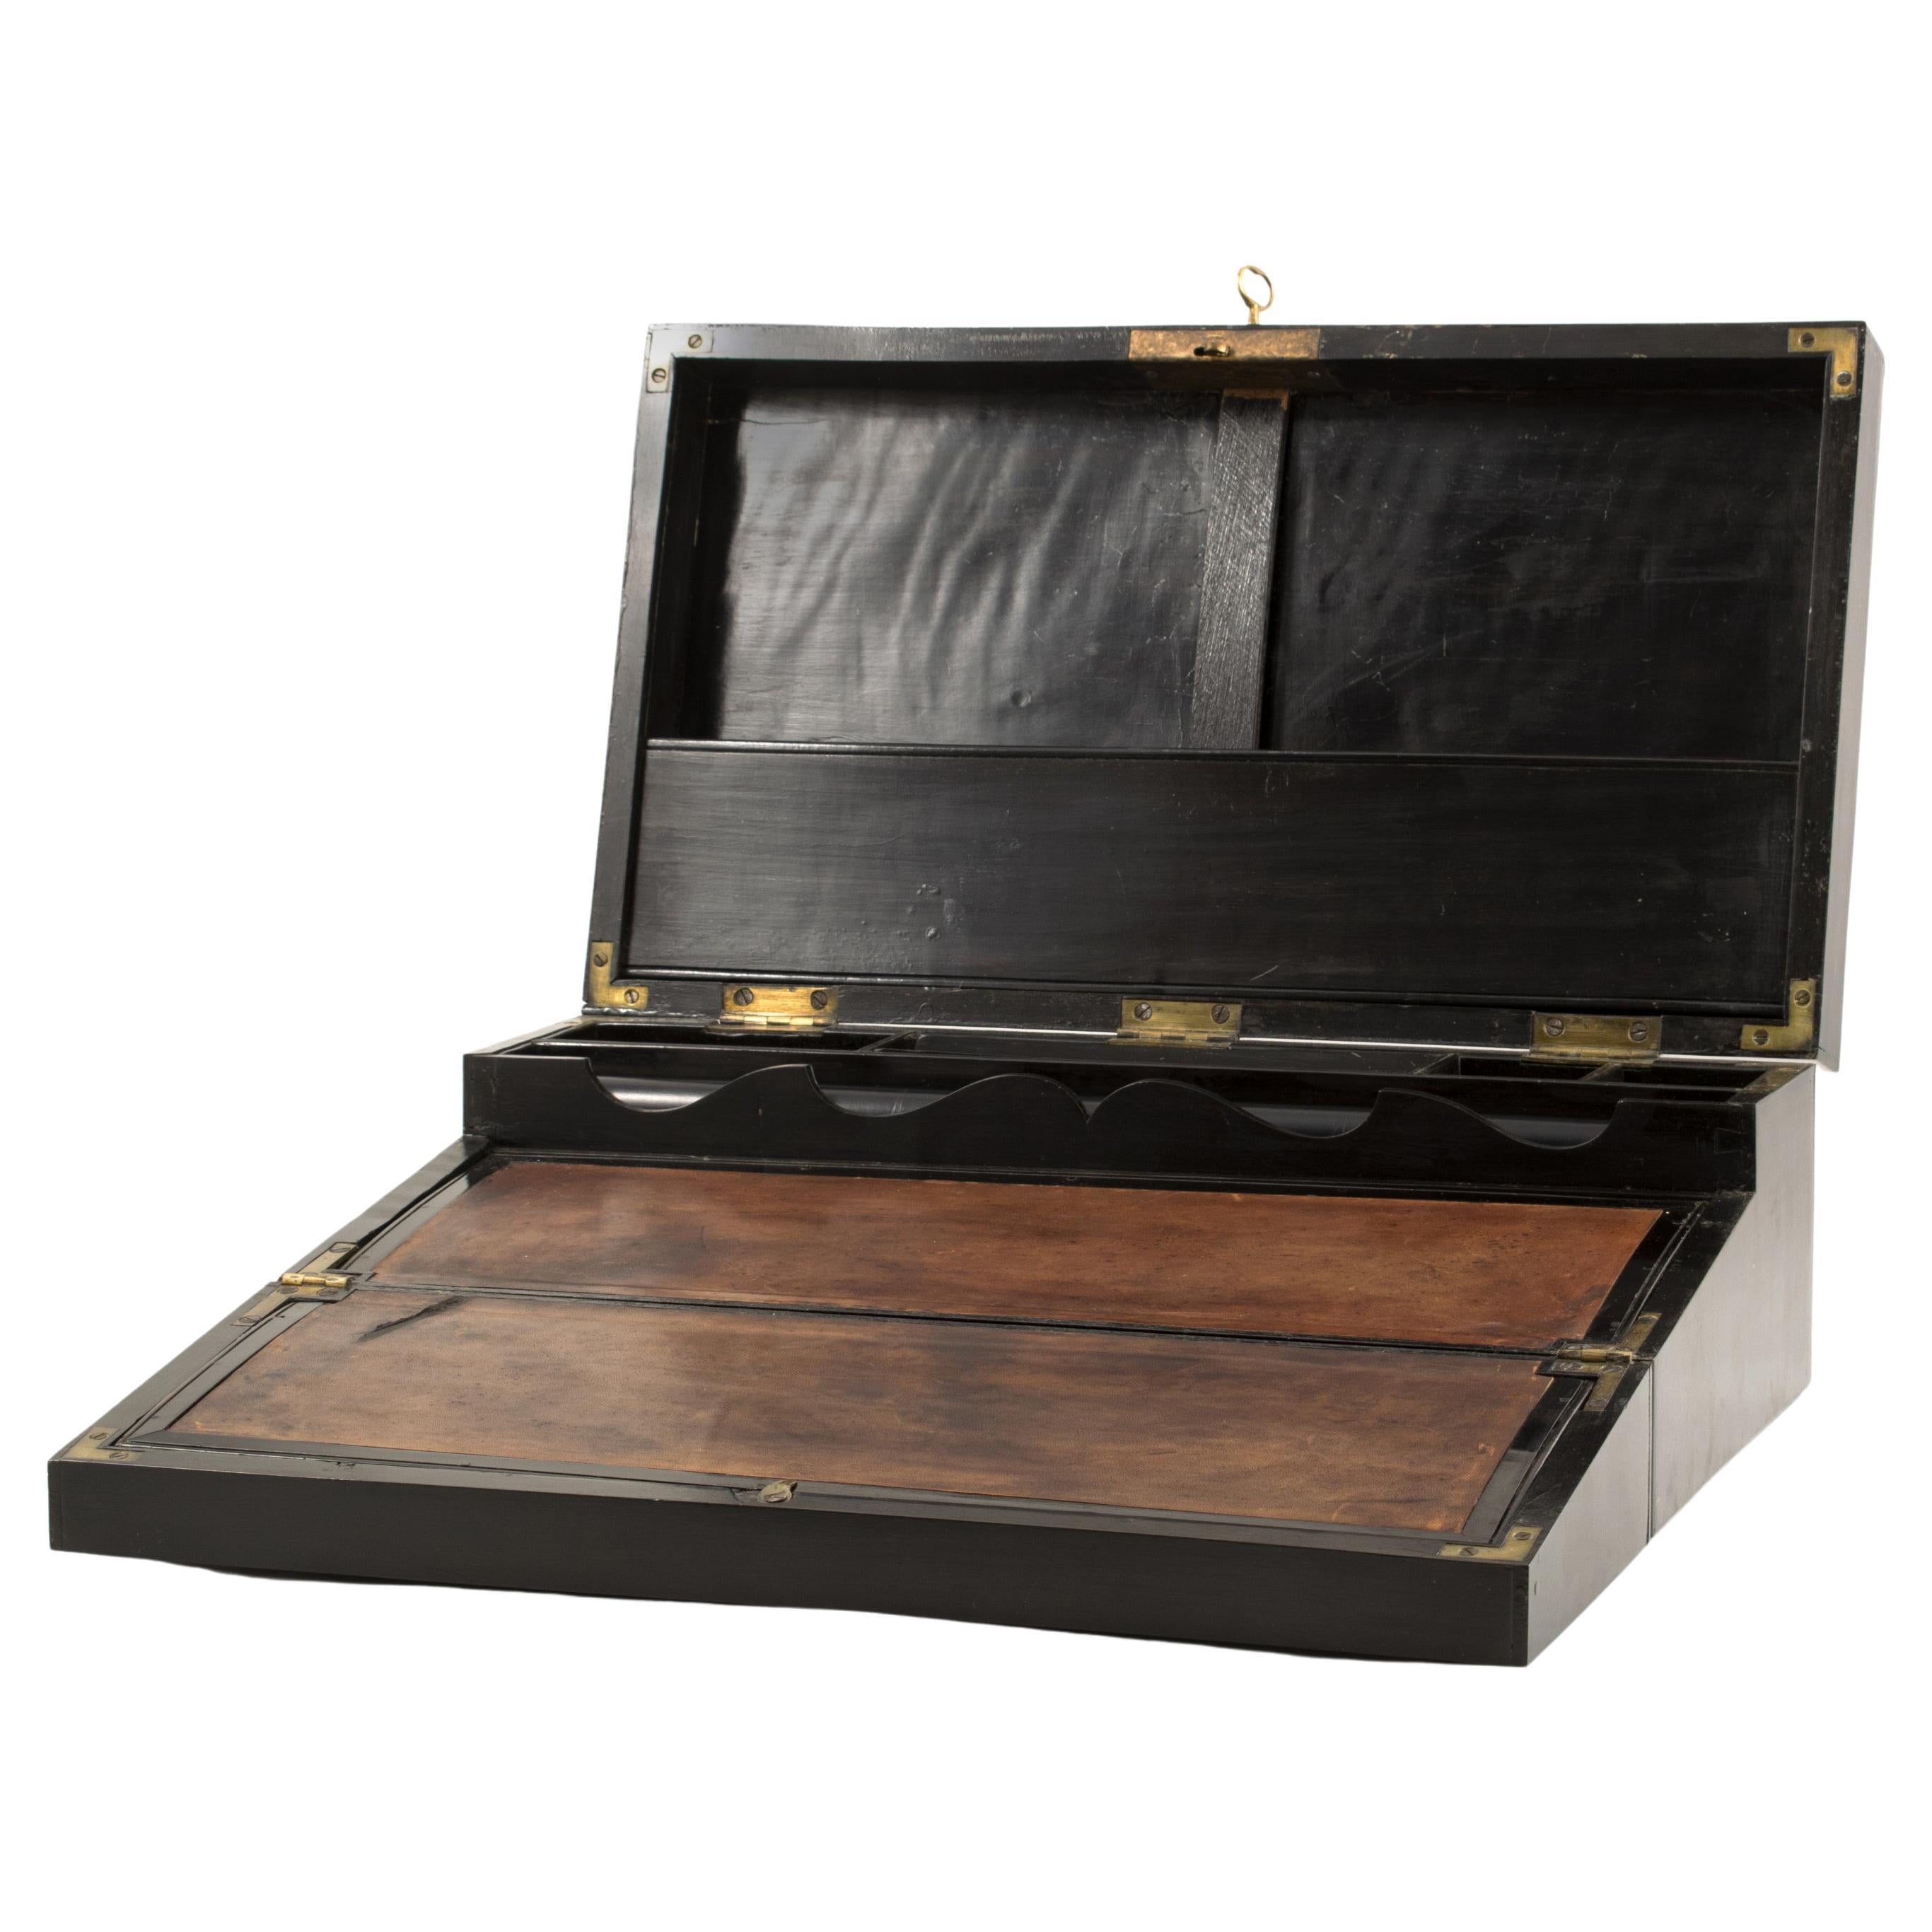 A rare Regency writing desk box made in solid ebony.
Original leather with natural age-related patina.
Original fittings and locks.

In good condition and untouched original.
England 1810 - 1820.